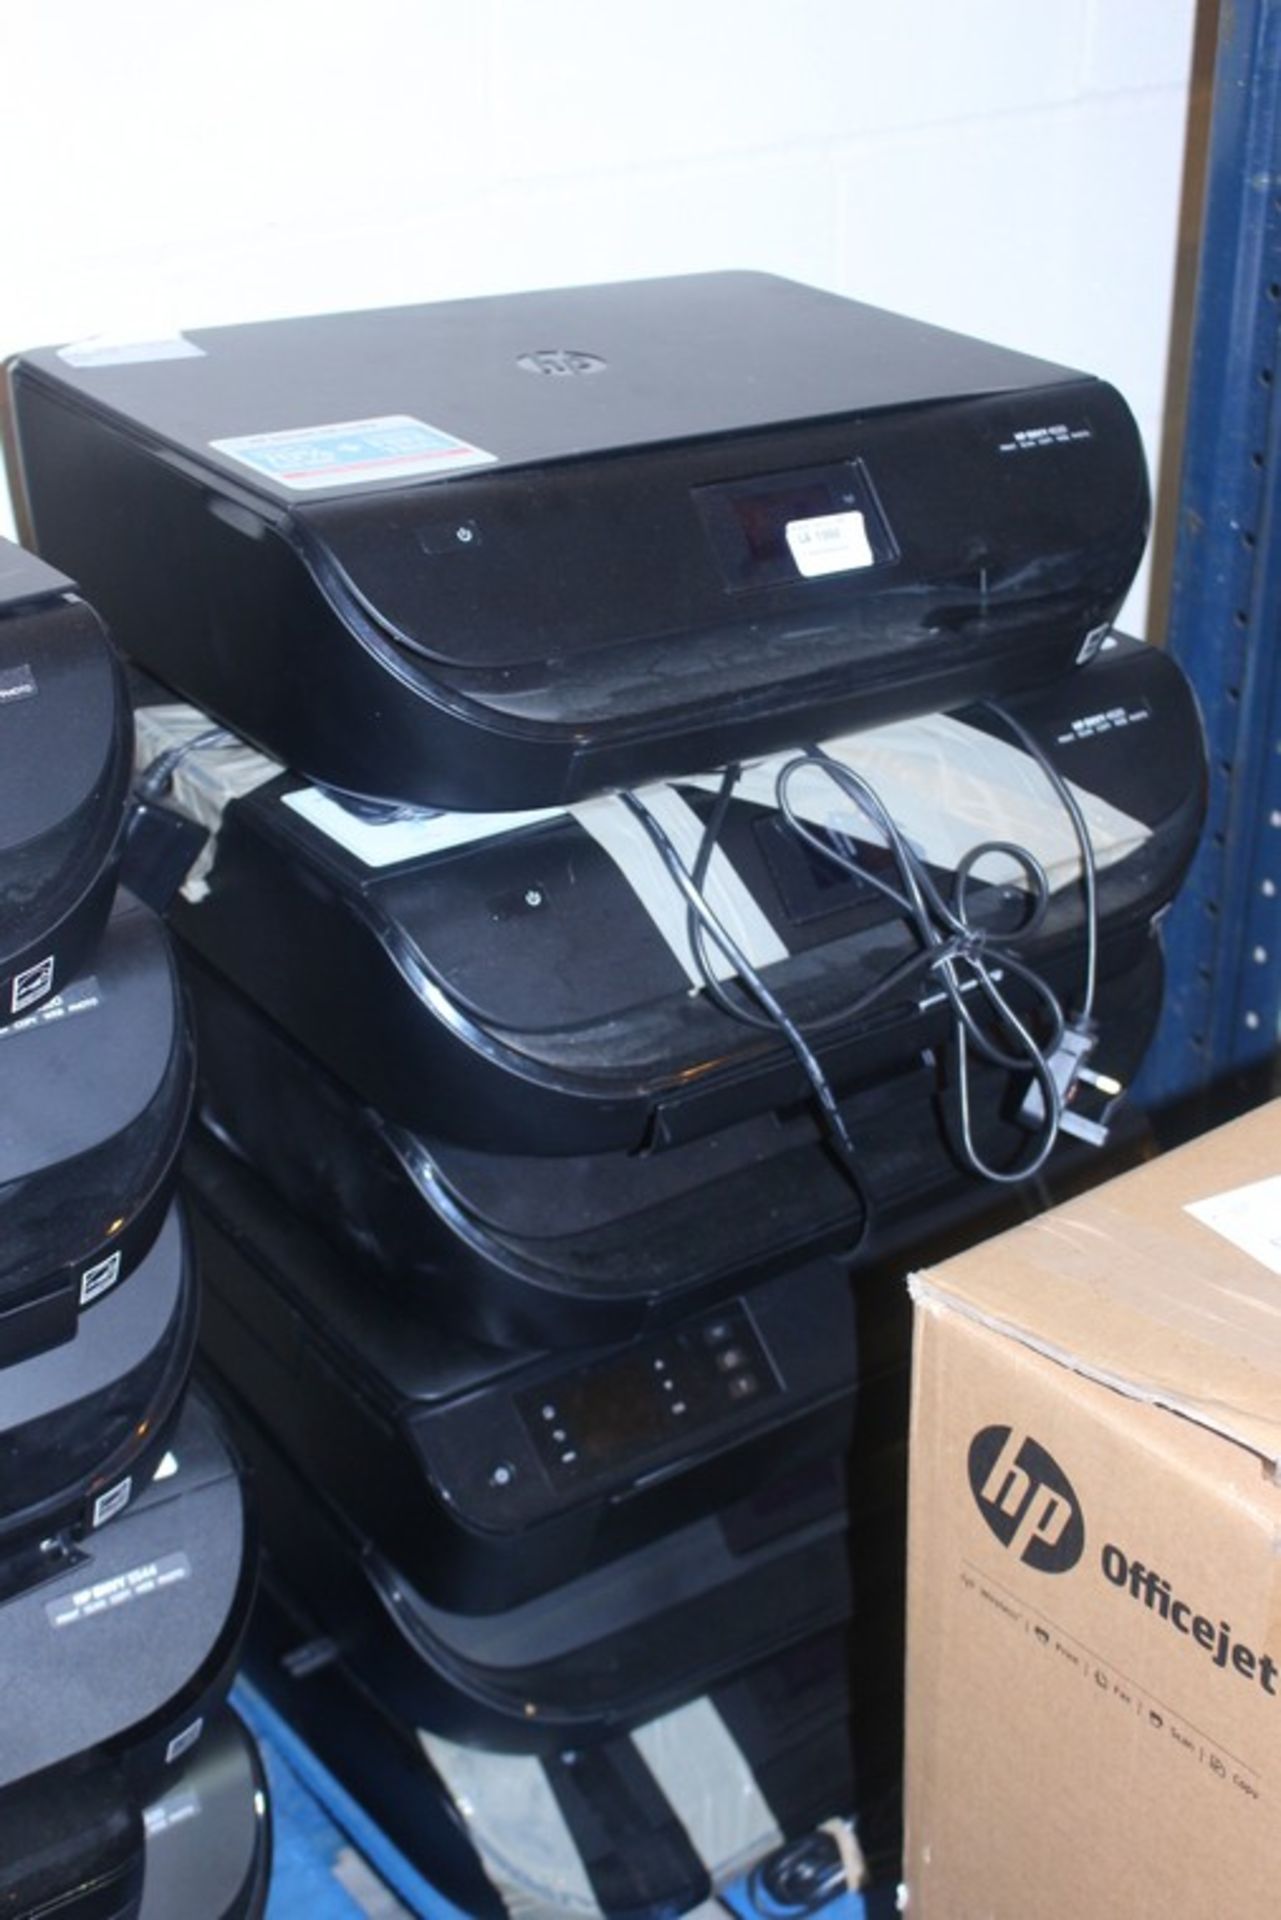 6 x ASSORTED HP ENVY PRINTERS (28.12.17) *PLEASE NOTE THAT THE BID PRICE IS MULTIPLIED BY THE NUMBER